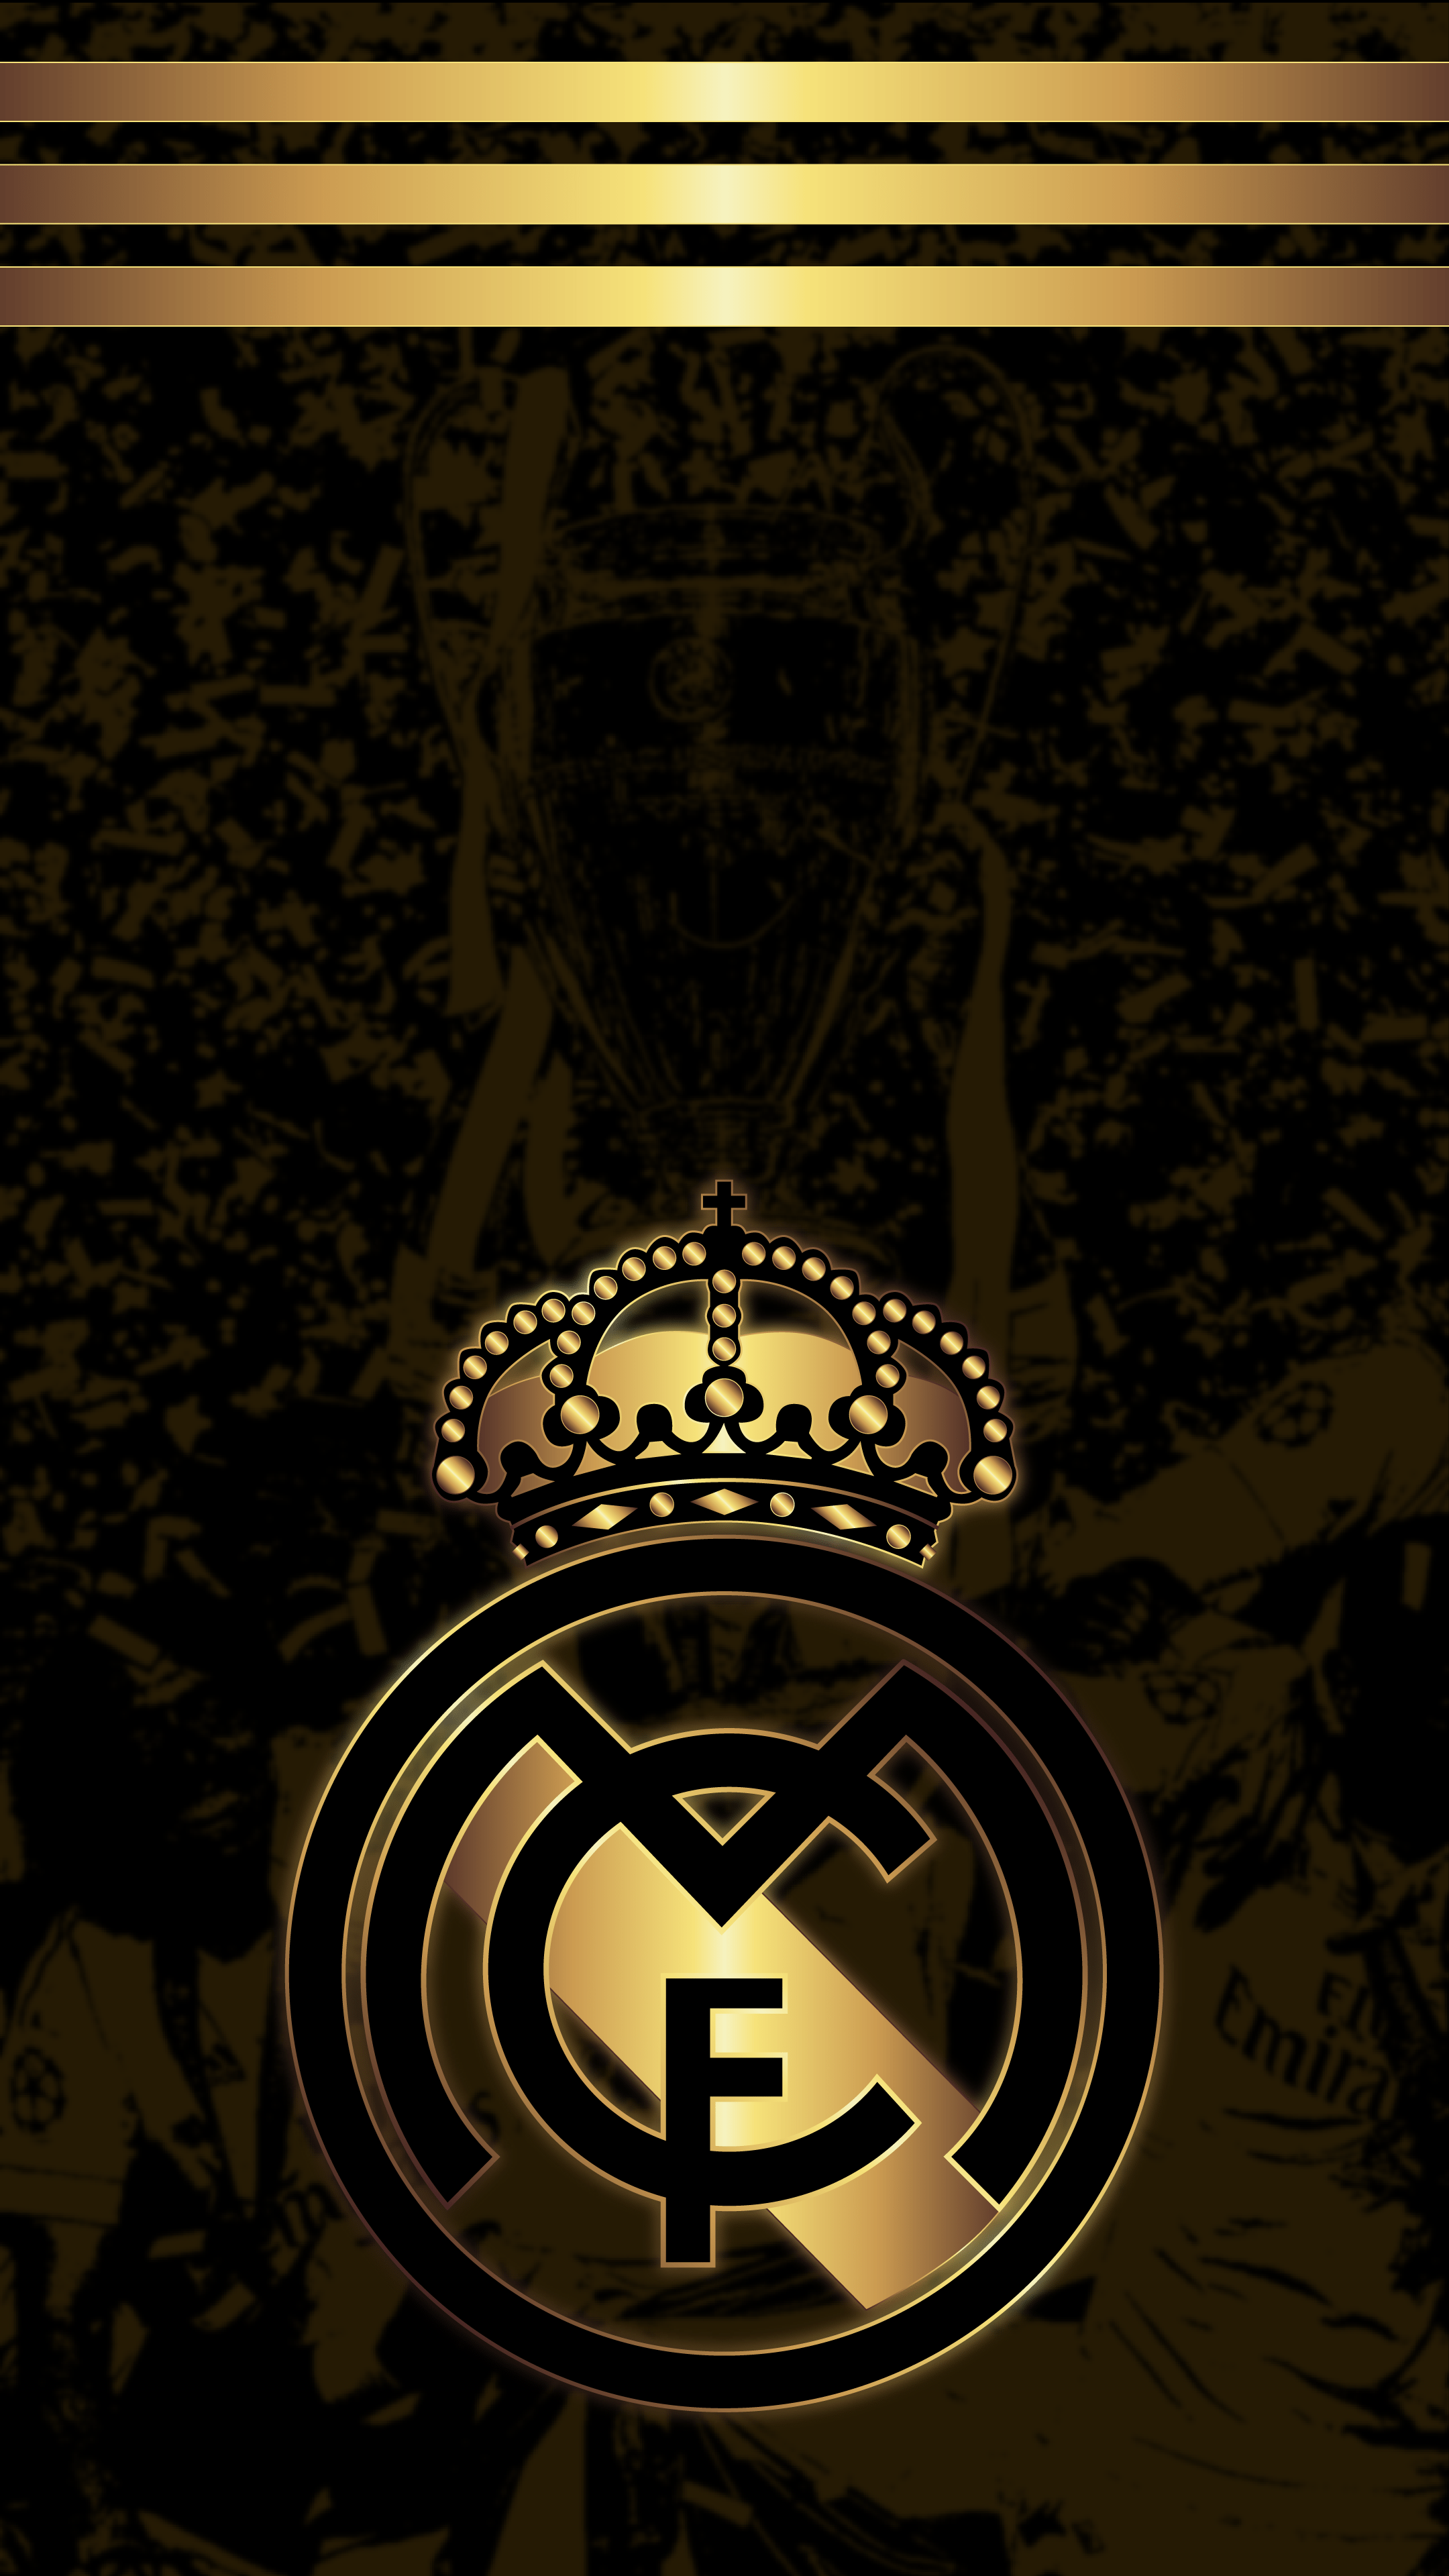 Real Madrid 4k Ultra Hd Wallpapers Top Free Real Madrid 4k Ultra Hd Backgrounds Wallpaperaccess